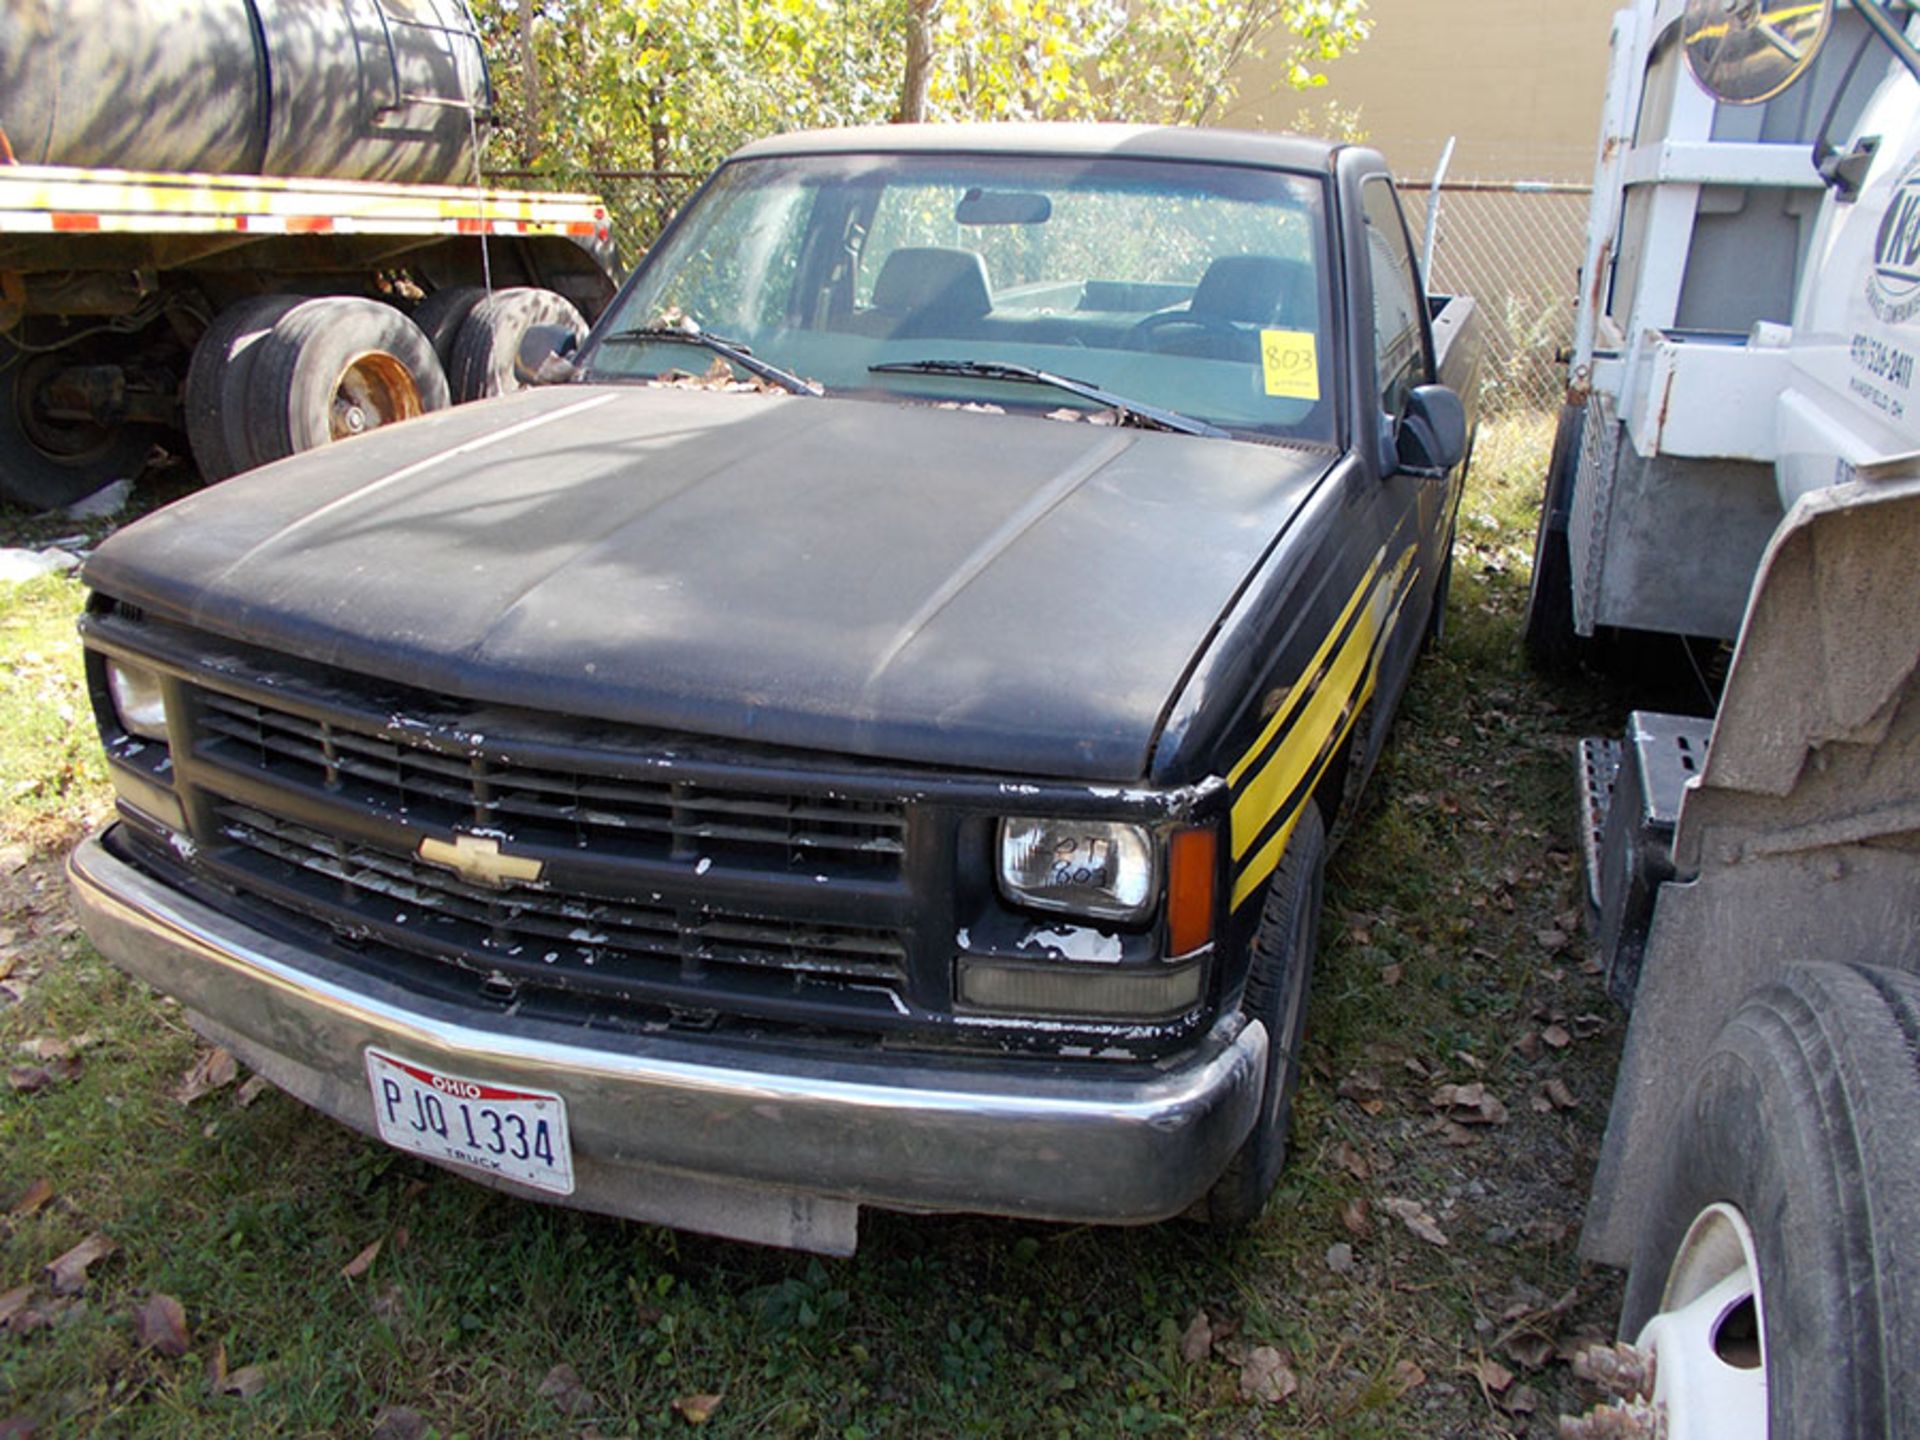 1998 CHEVY PICKUP TRUCK; 159,381 MILES, VIN 1GEC14W8WZ104967 (NEEDS REPAIRS) ***LOCATED IN